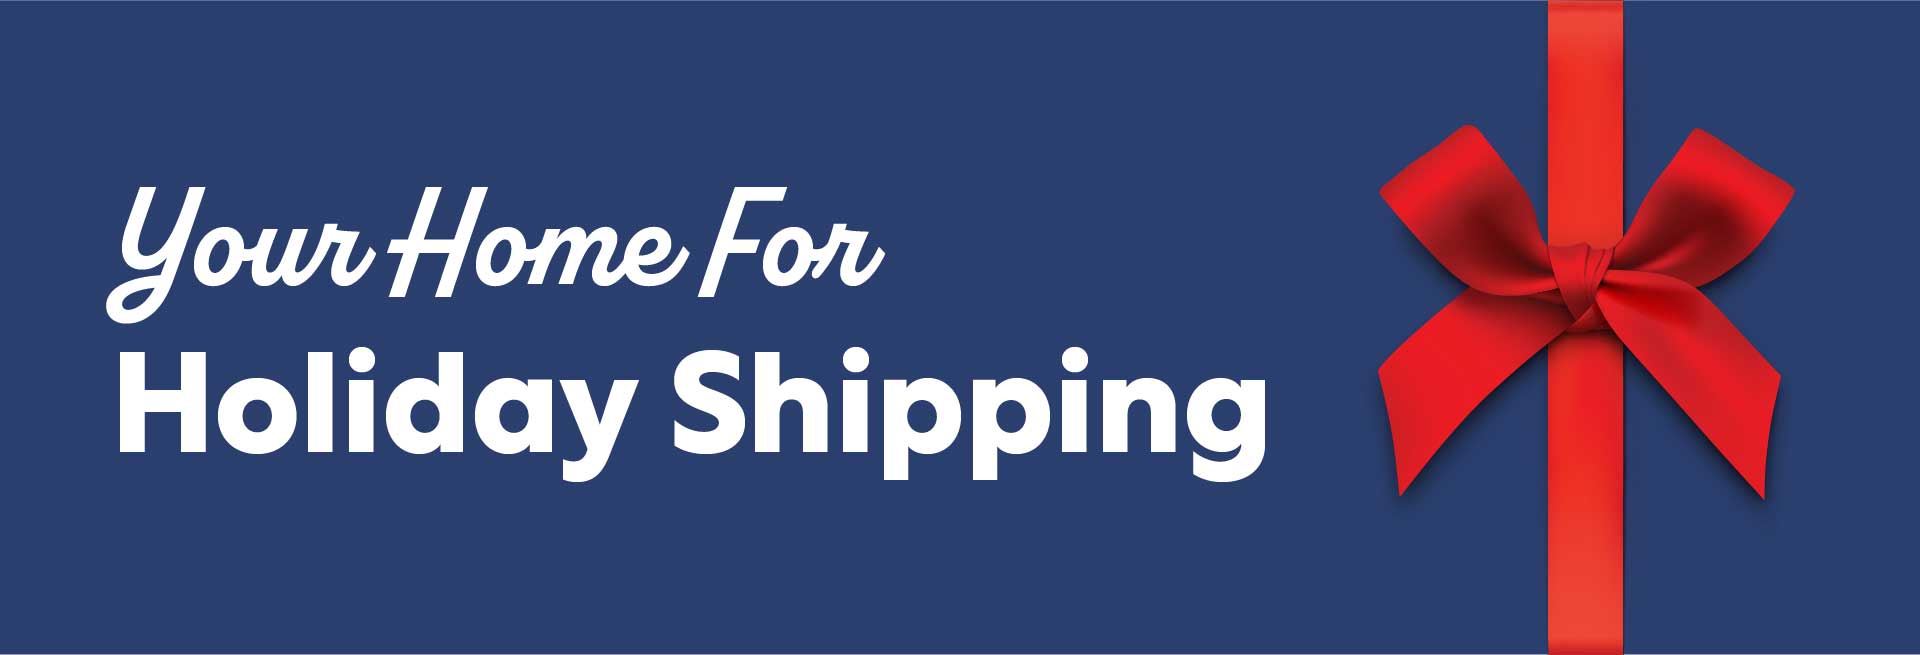 Your Home for Holiday Shipping.